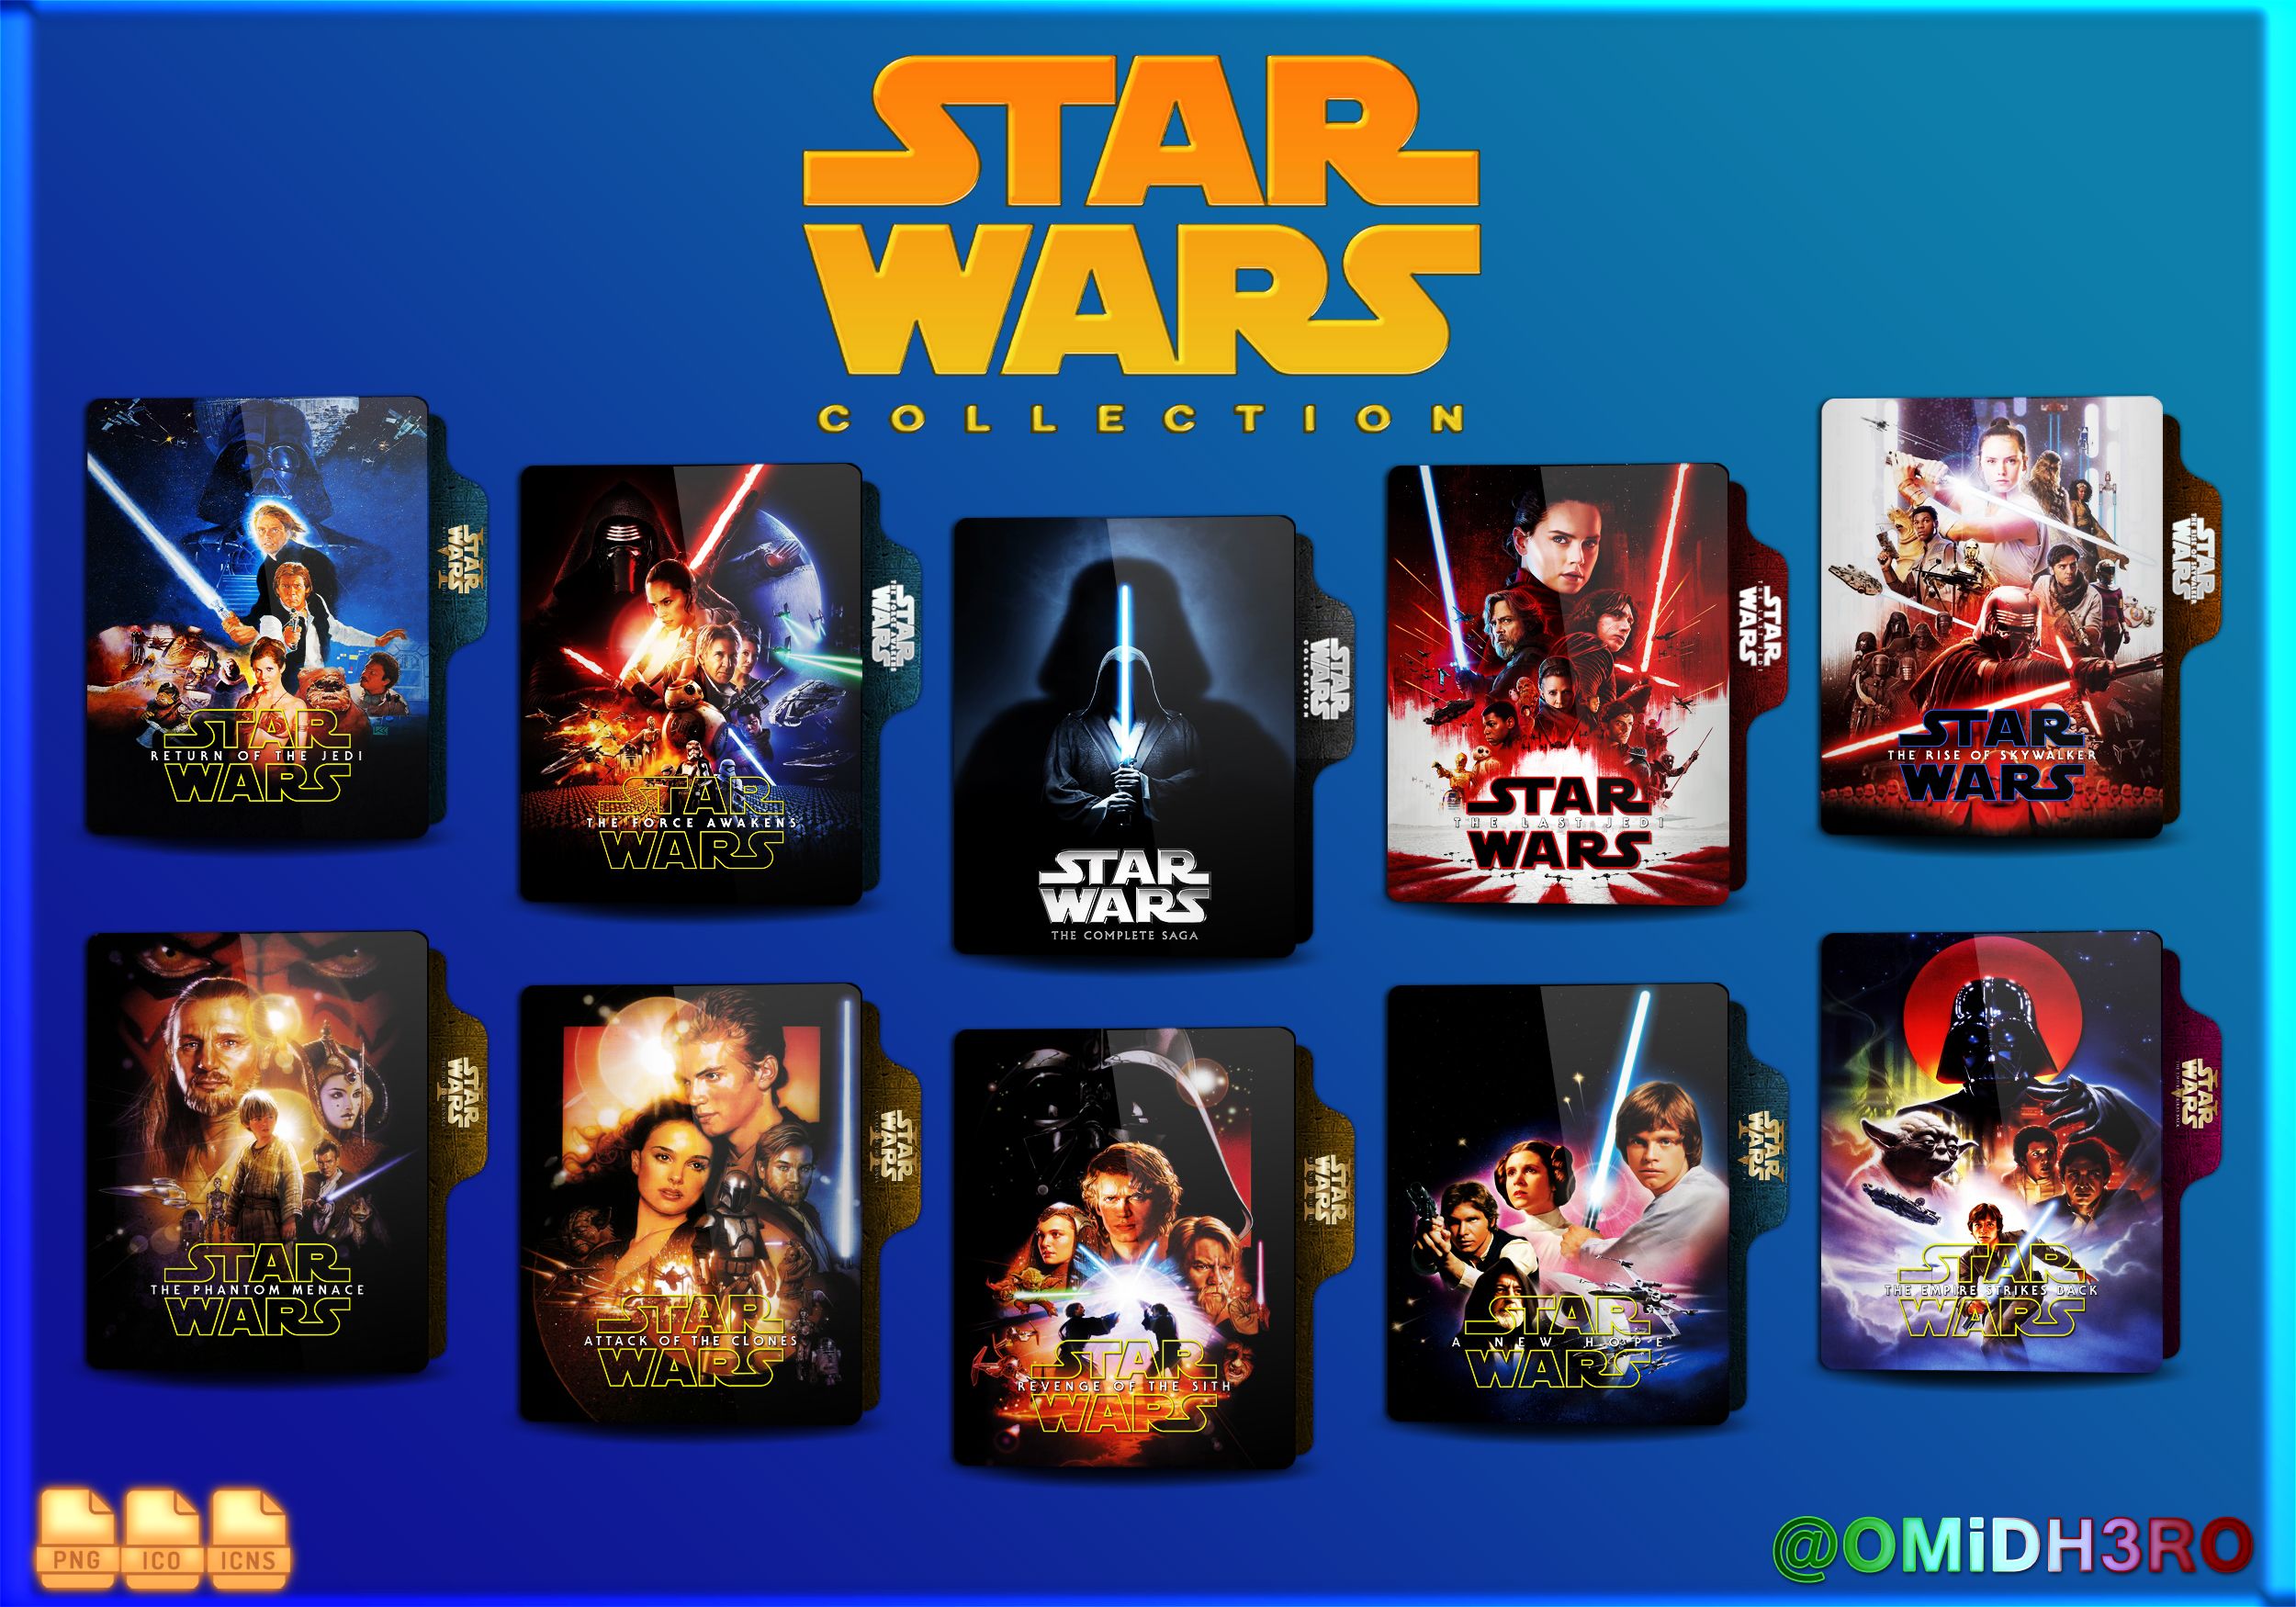 Star Wars - Collection Folder Icon by OMiDH3RO on DeviantArt